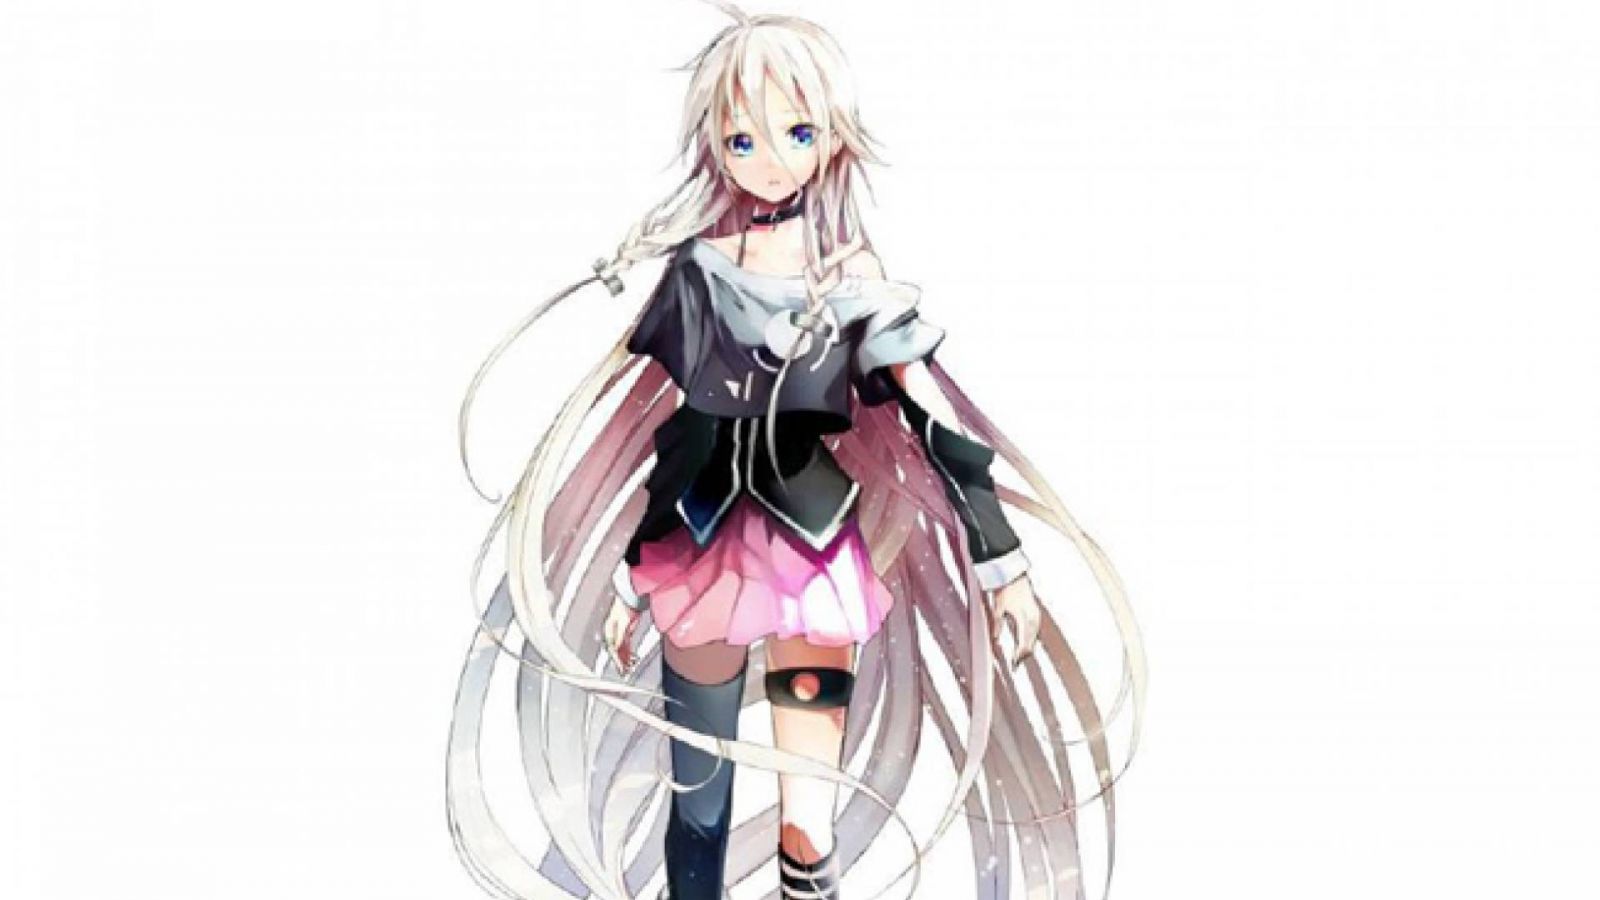 IA to Debut in NYC, Pre-Show Event at Kinokuniya Bookstore © 1st PLACE Co. Ltd.